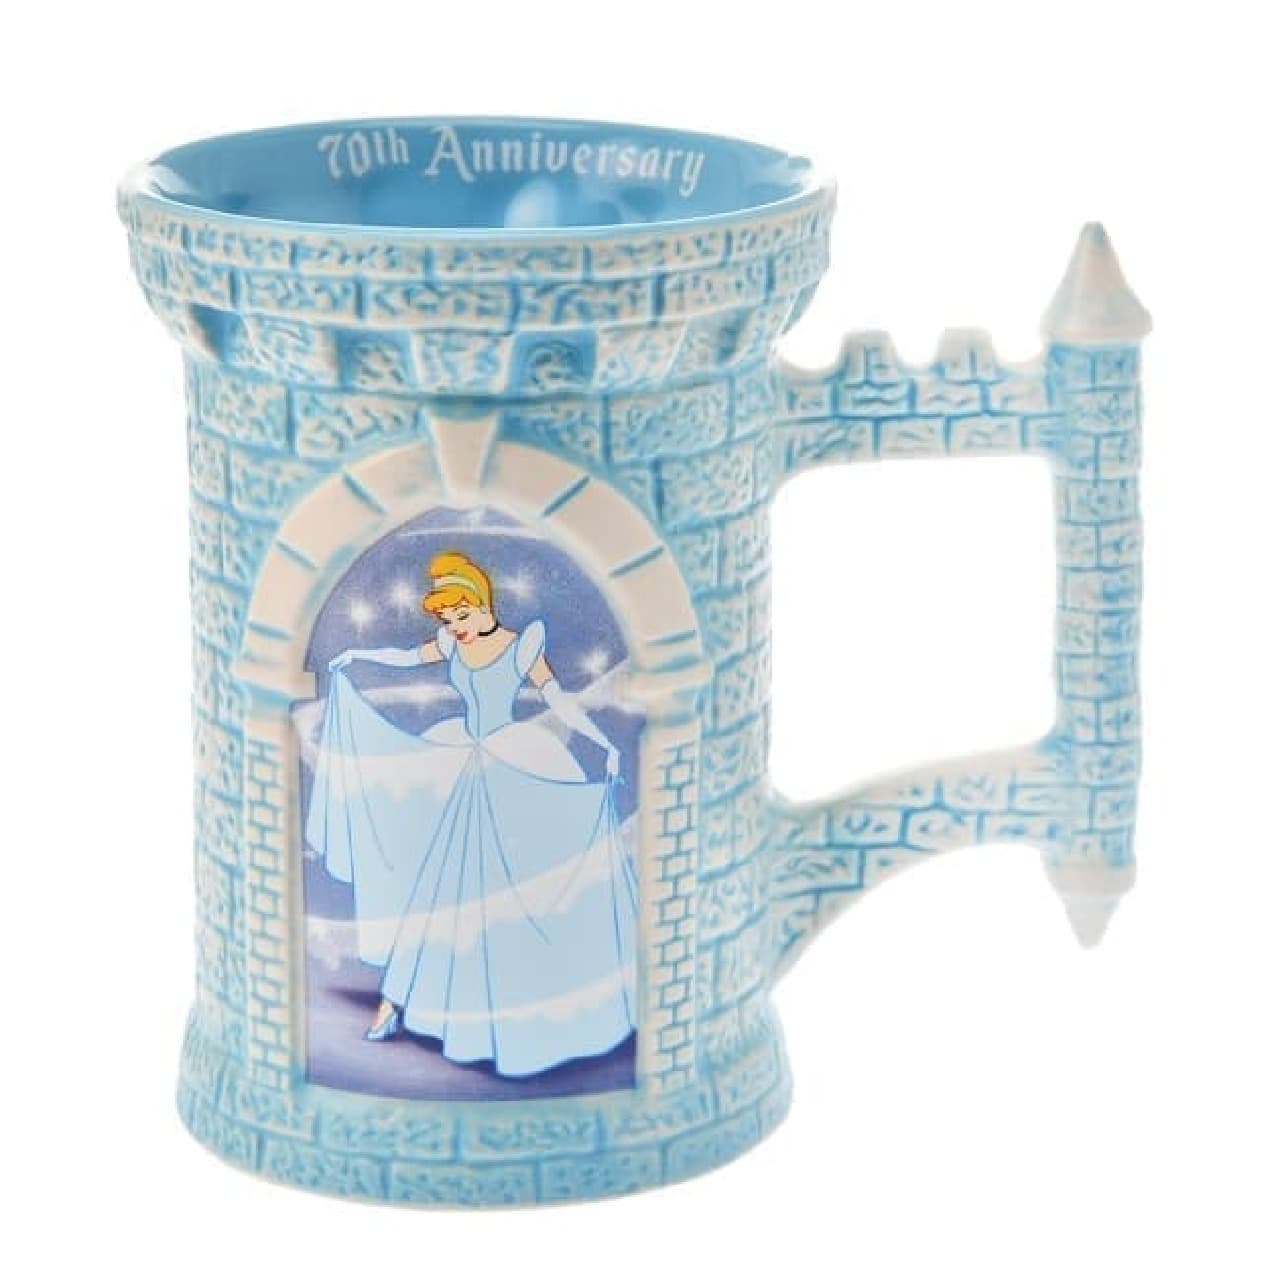 Cinderella 70th Anniversary Goods at Disney Store-"Glass Shoes" Smartphone Stand